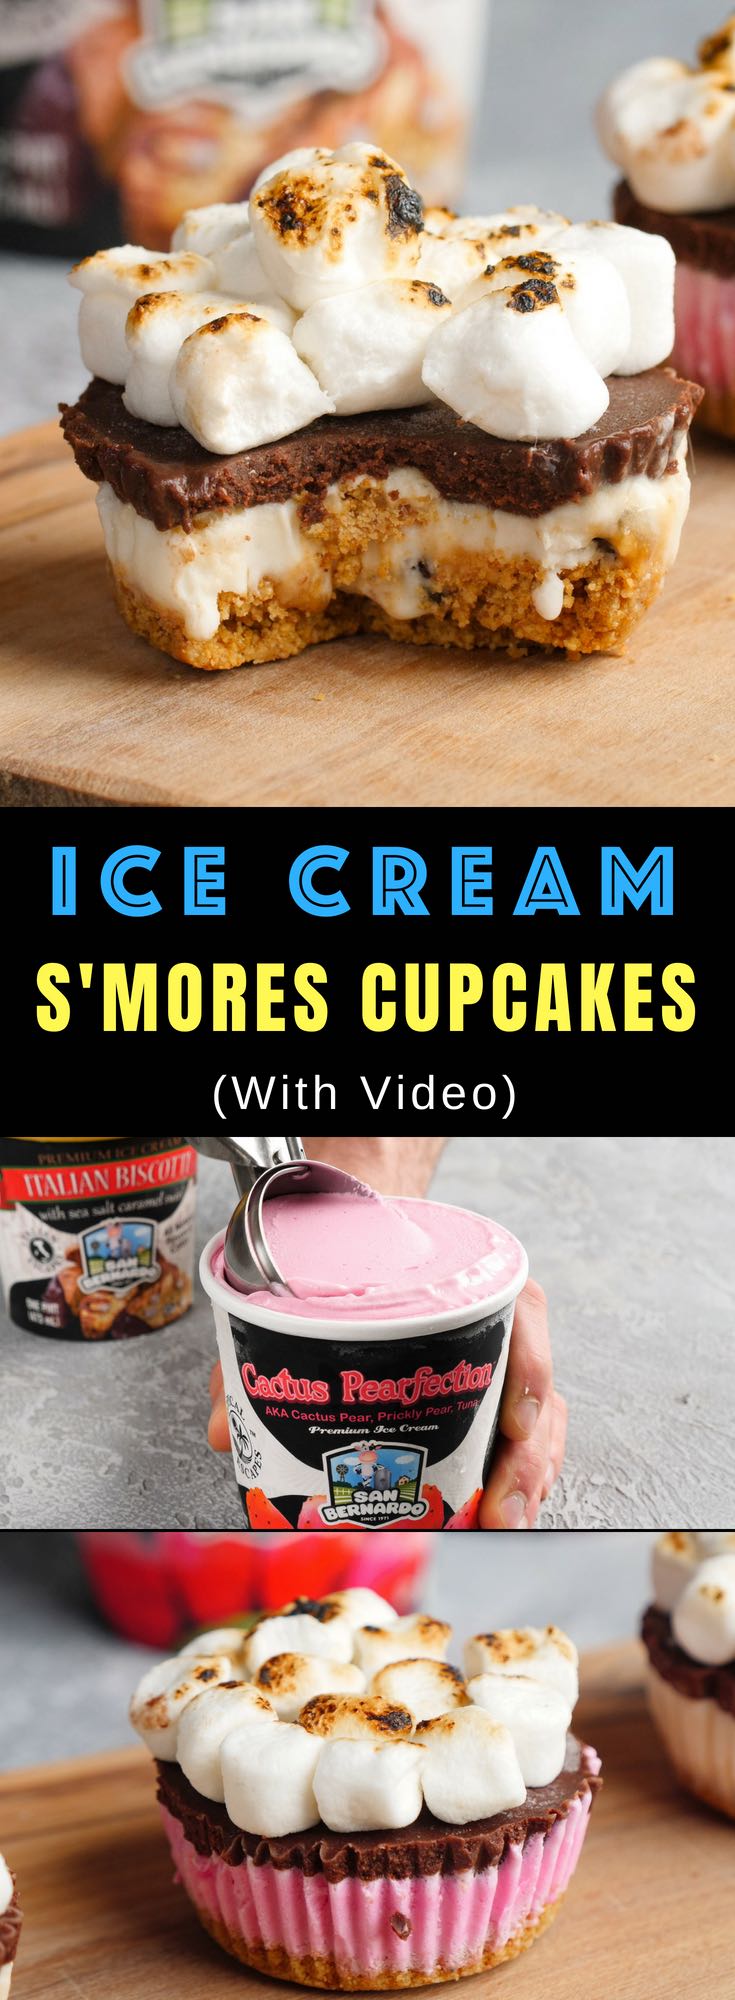 These Ice Cream S’mores Cupcakes are the perfect frozen treats for summertime parties and get-togethers. Make them in advance for a dessert the entire family will love with only 6 ingredients. Video recipe! #smores #icecream #SpoonThis AD